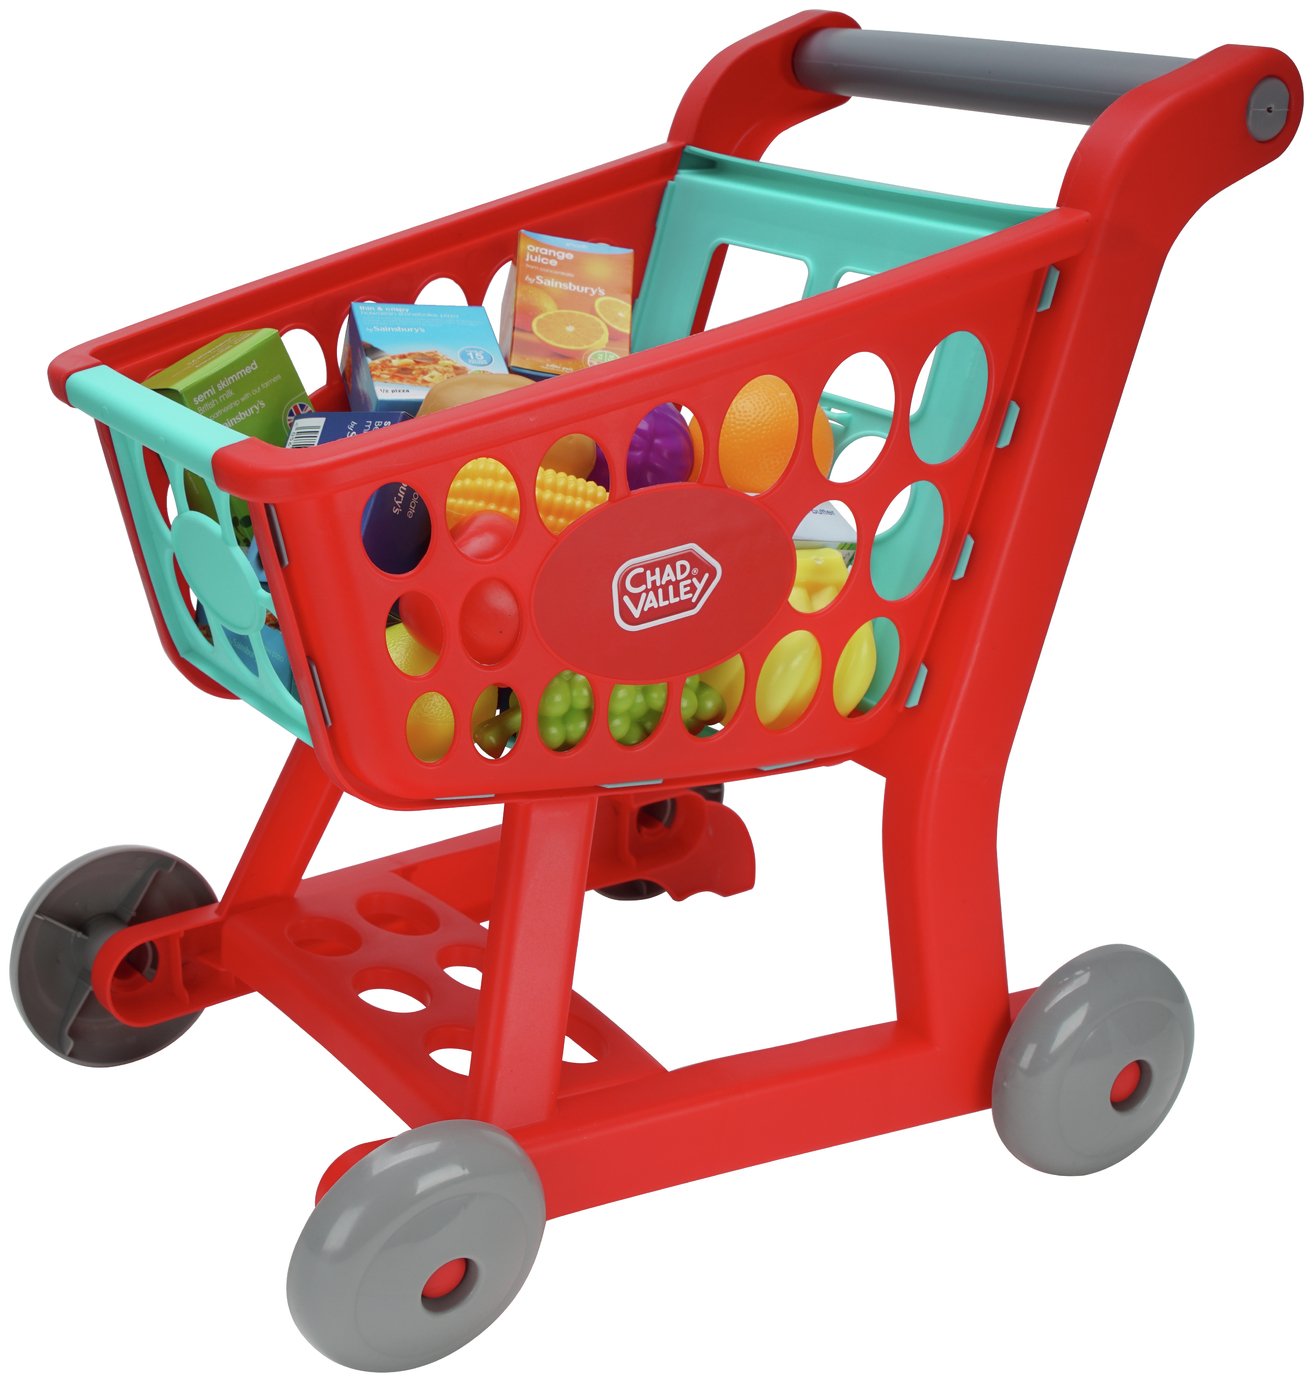 Chad Valley Shopping Trolley review